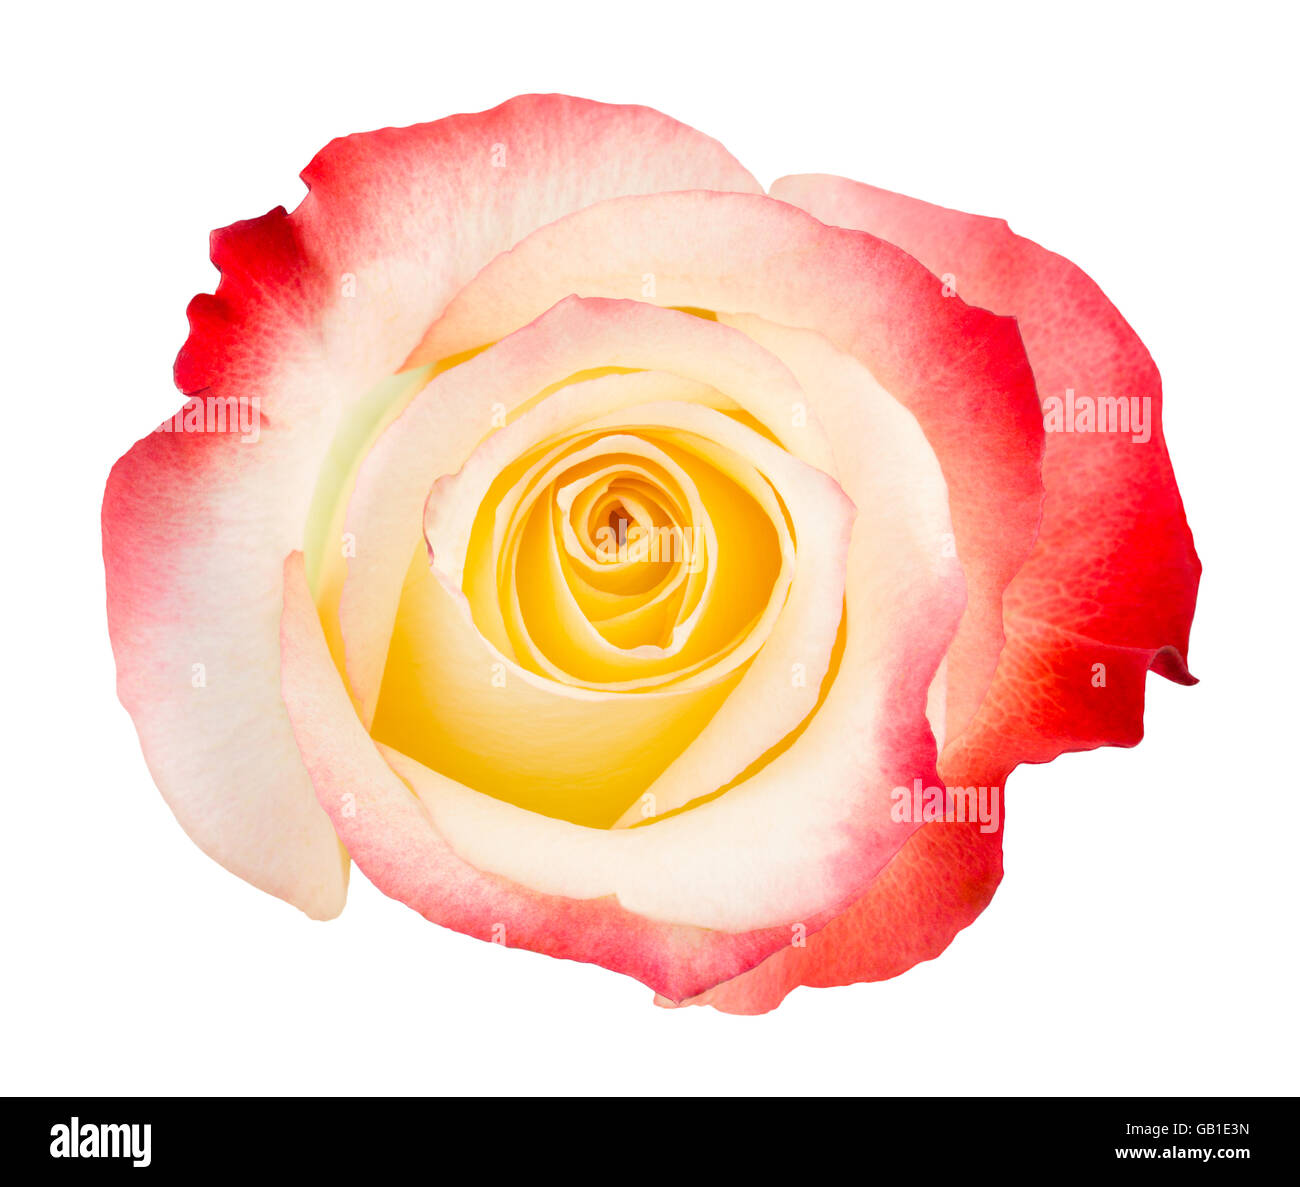 Bi-colored rose of red, cream and yellow, isolated on white background. Stock Photo